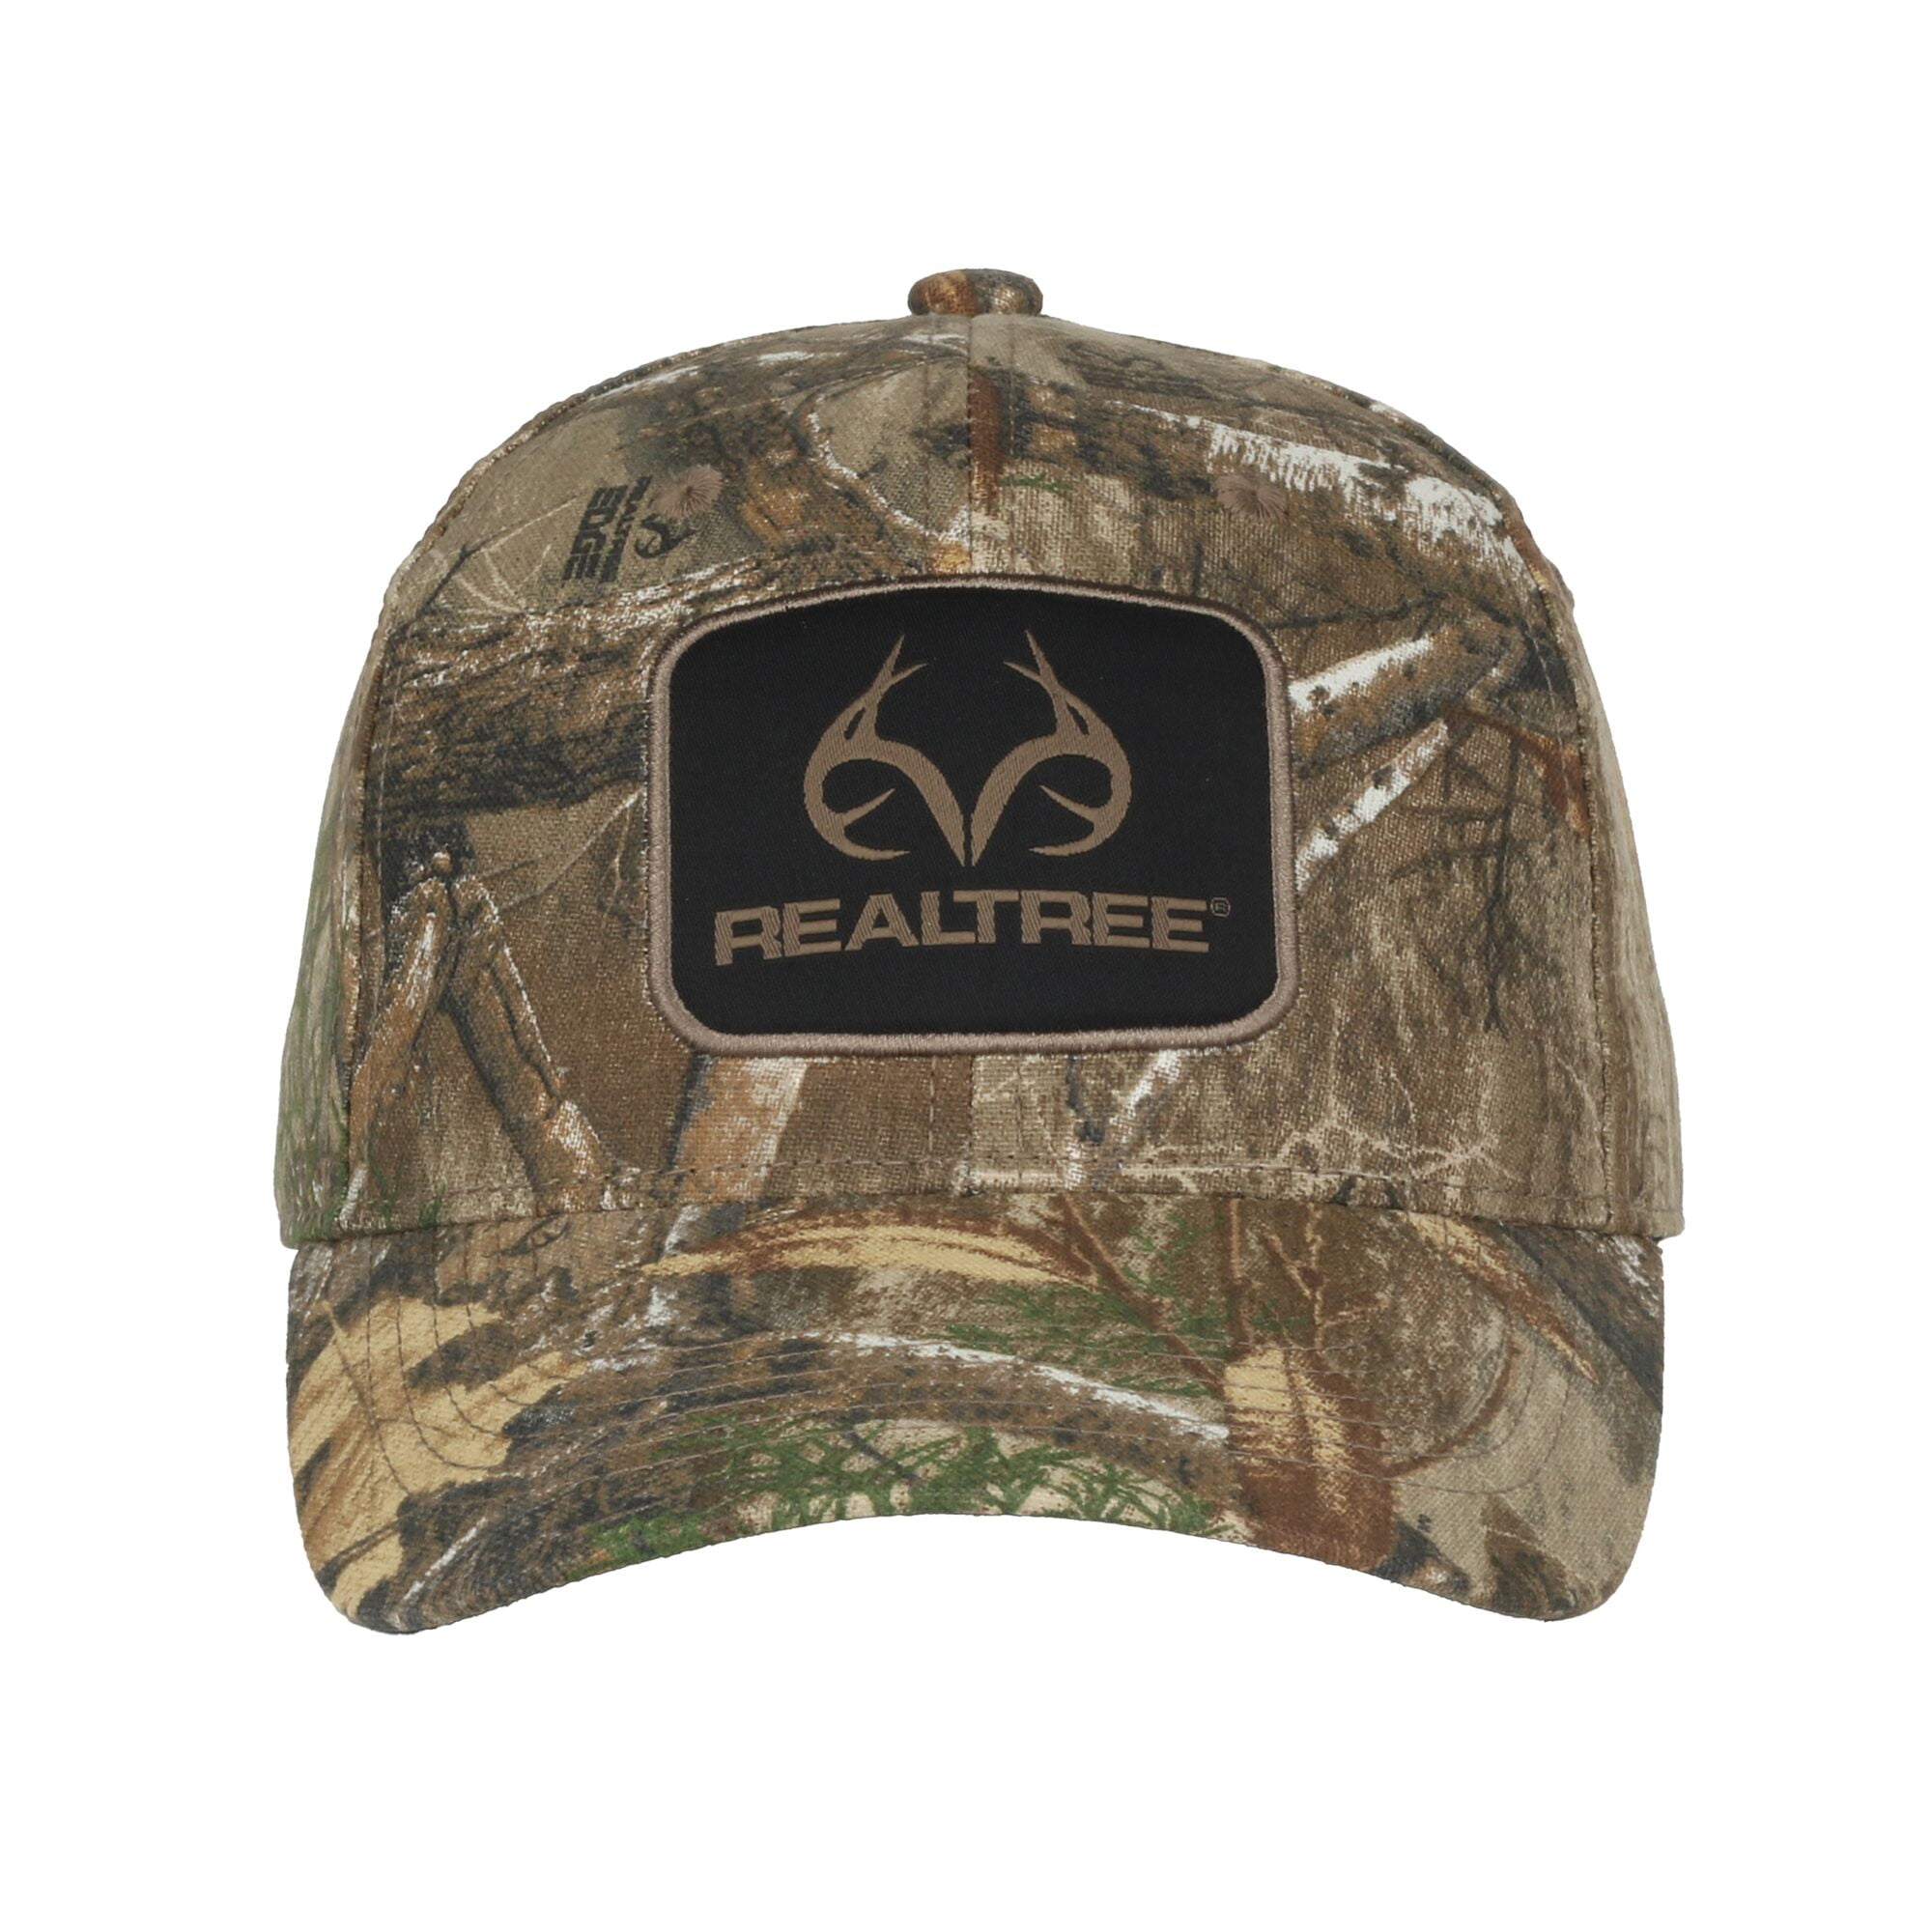 Realtree DUK Fabric Structured Baseball Style Hat, Edge Camo, Adult, Men's